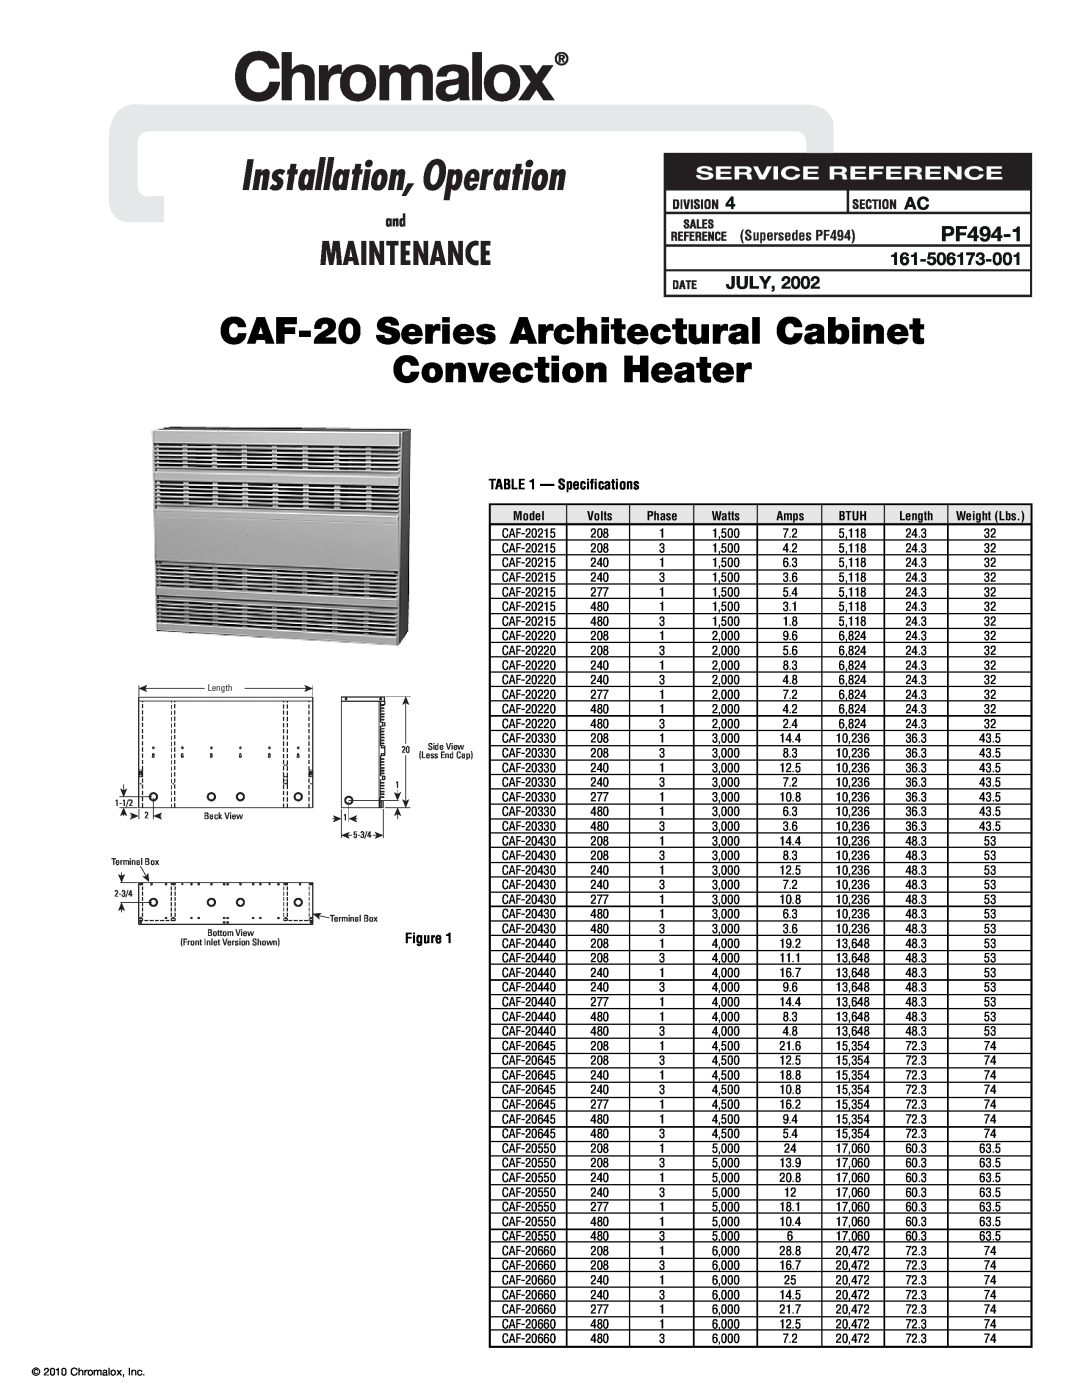 Chromalox CAF-20330 specifications PF494-1, Installation, Operation, CAF-20Series Architectural Cabinet, Convection Heater 